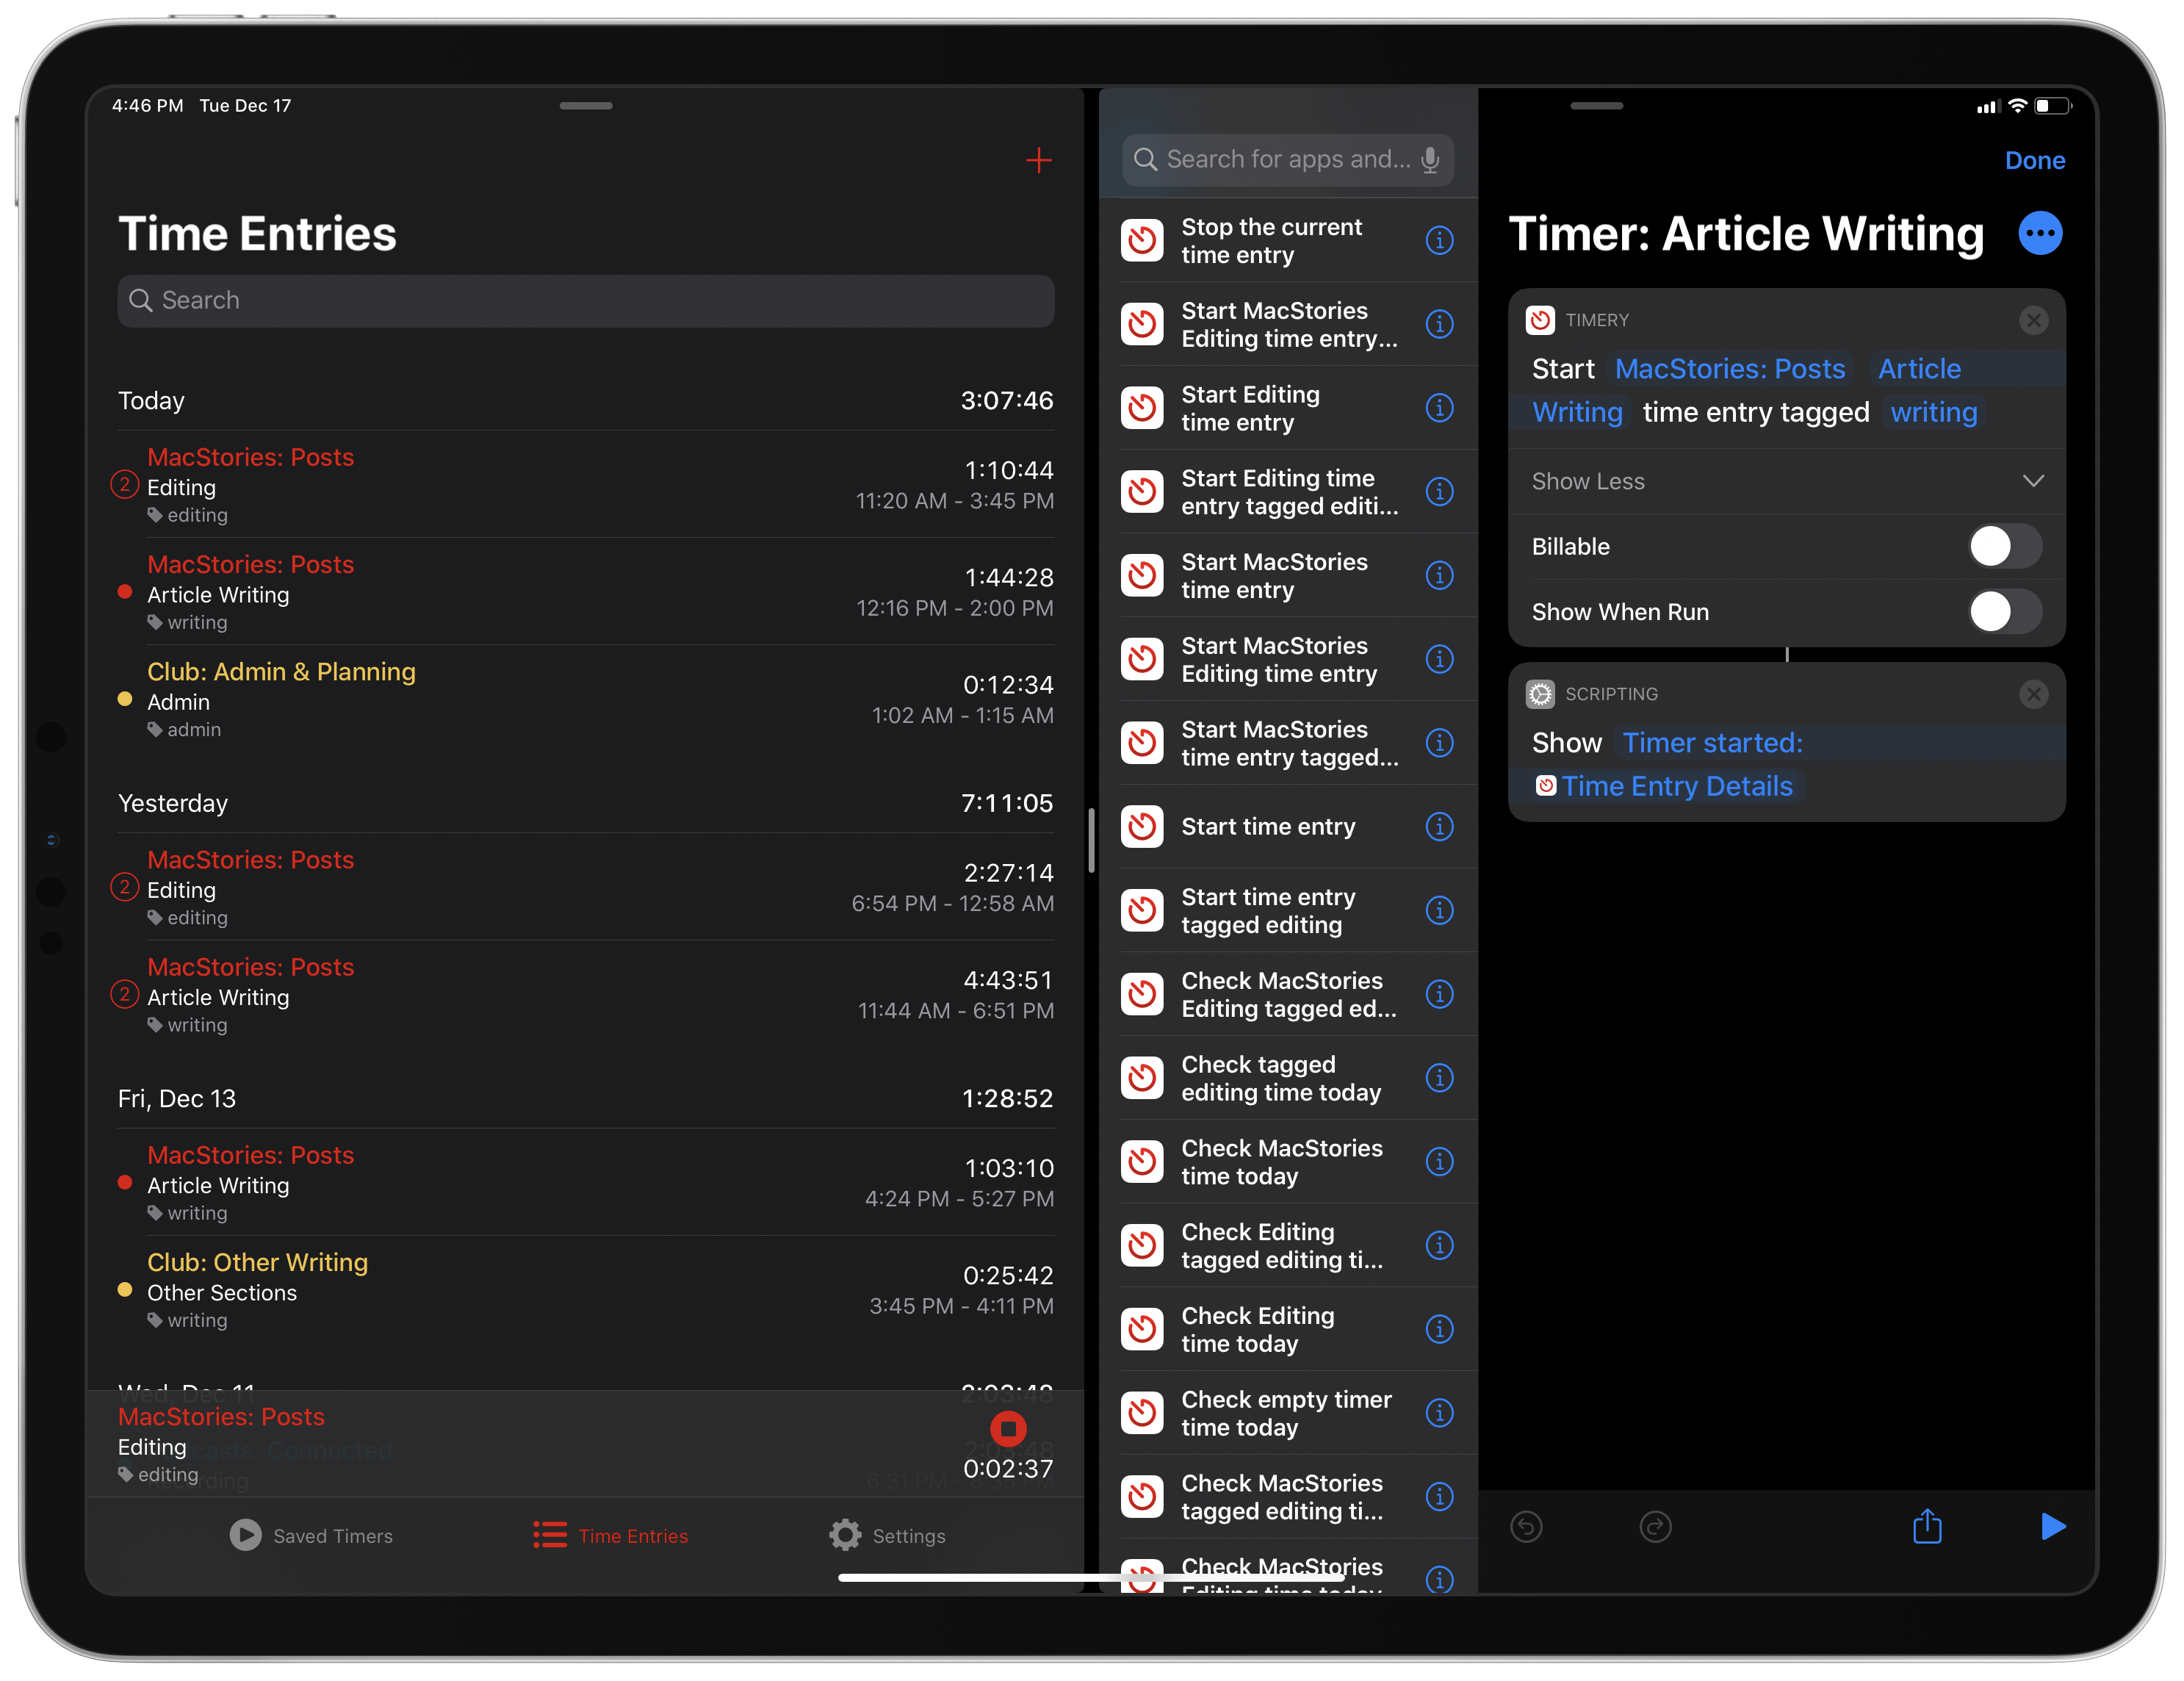 Timery has excellent integration with Shortcuts.